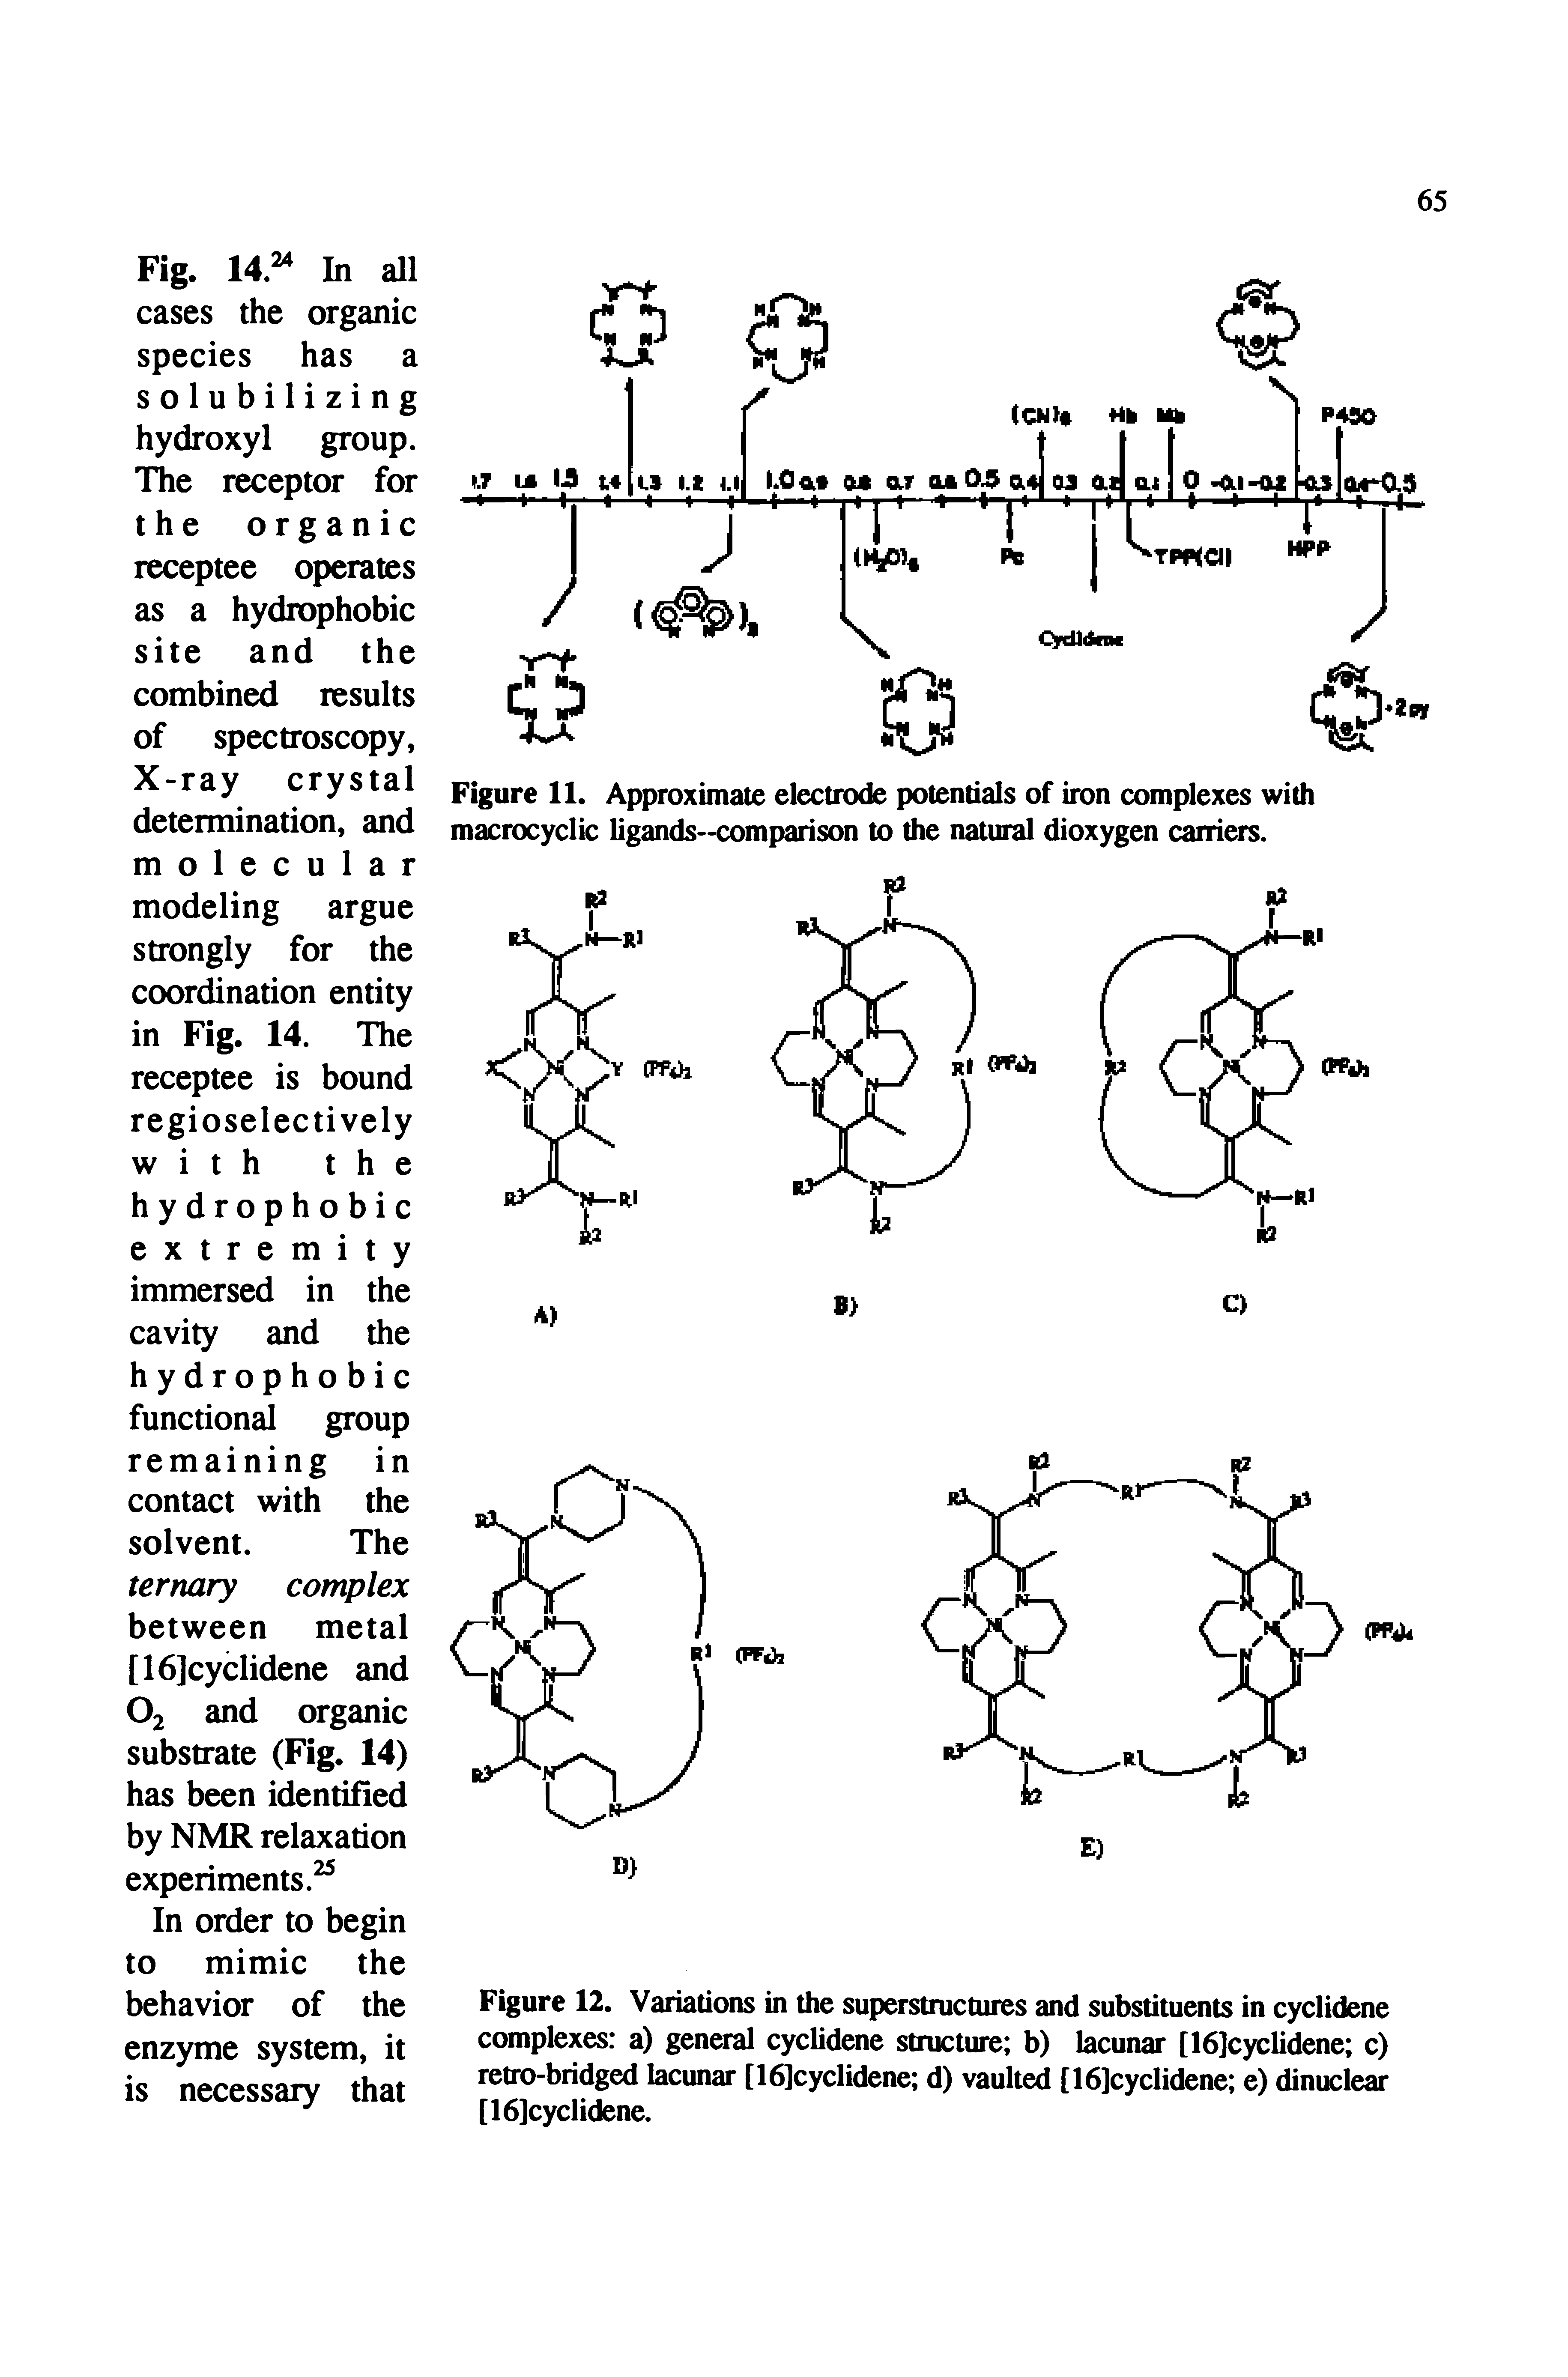 Figure 12. Variations in the superstructures and substituents in cyclidene complexes a) general cyclidene structure b) lacunar [16]cyclidene c) retro-bridged lacunar [1 cyclidene d) vaulted [16]cyclidene e) dinuclear [16]cyclidene.